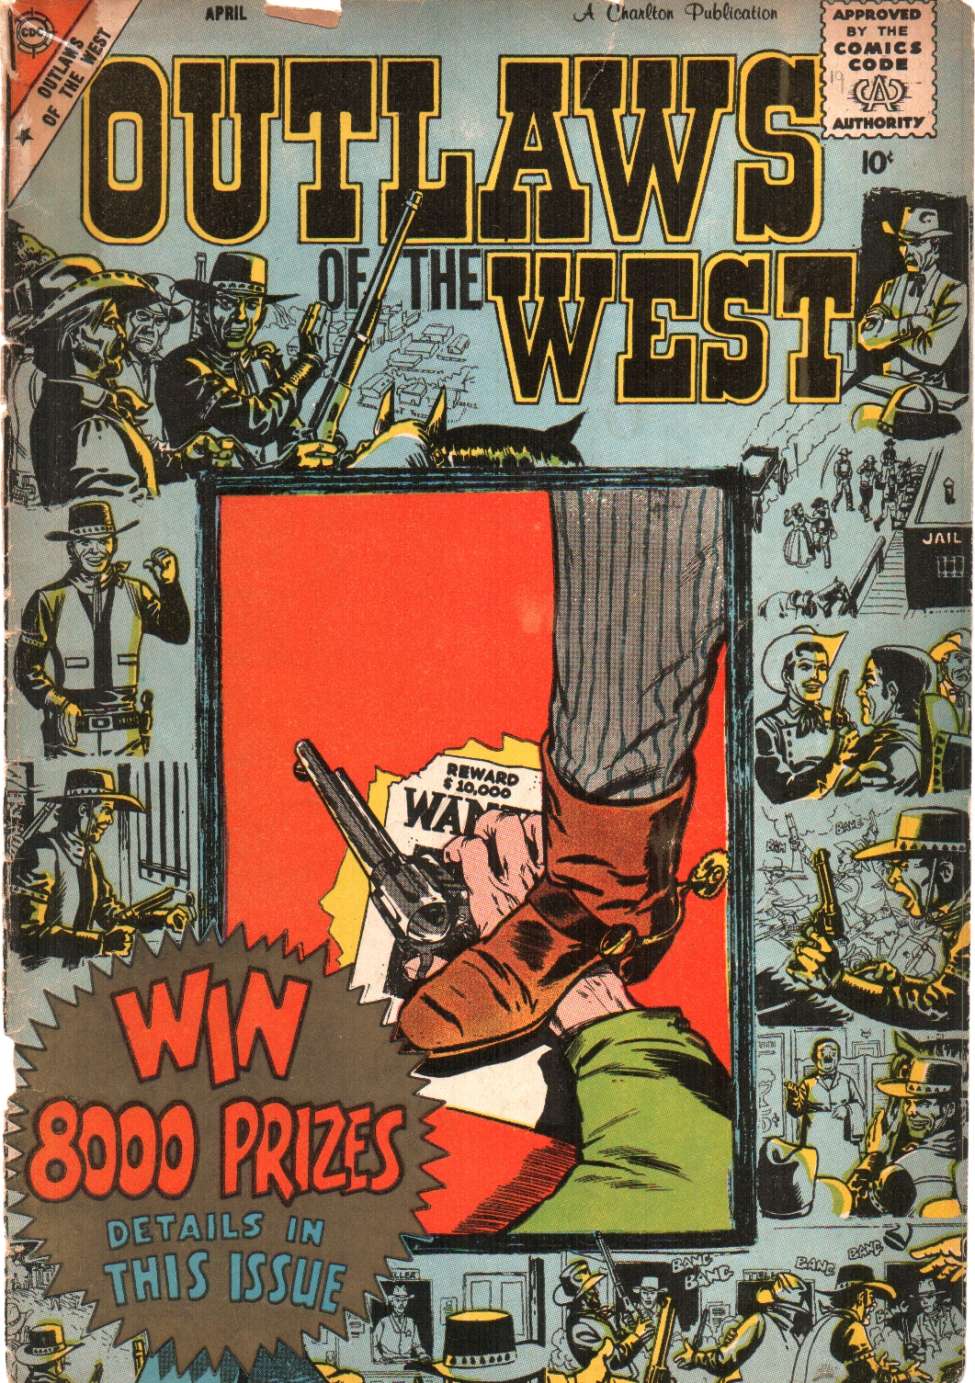 Book Cover For Outlaws of the West 19 - Version 1